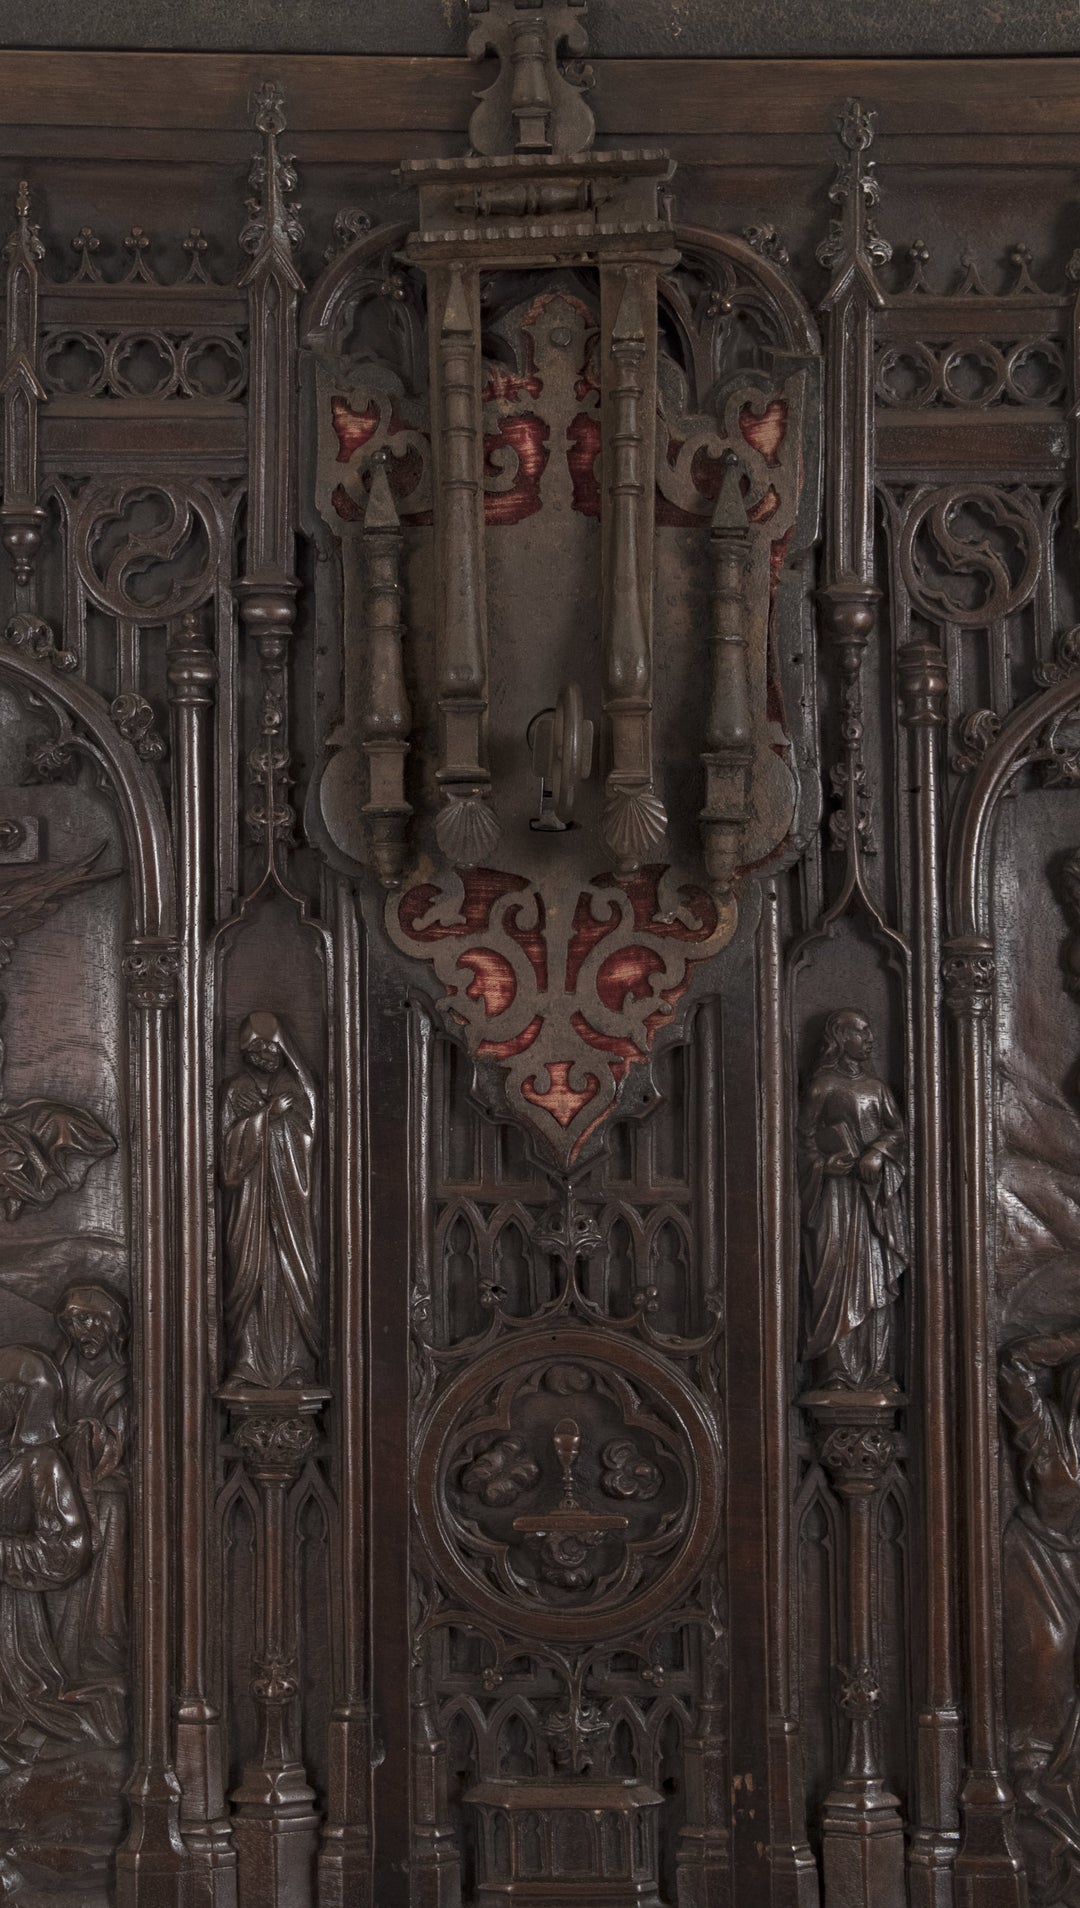 16th Century Spanish Vargueño Cabinet with Limoges Enamel Drawer Fronts